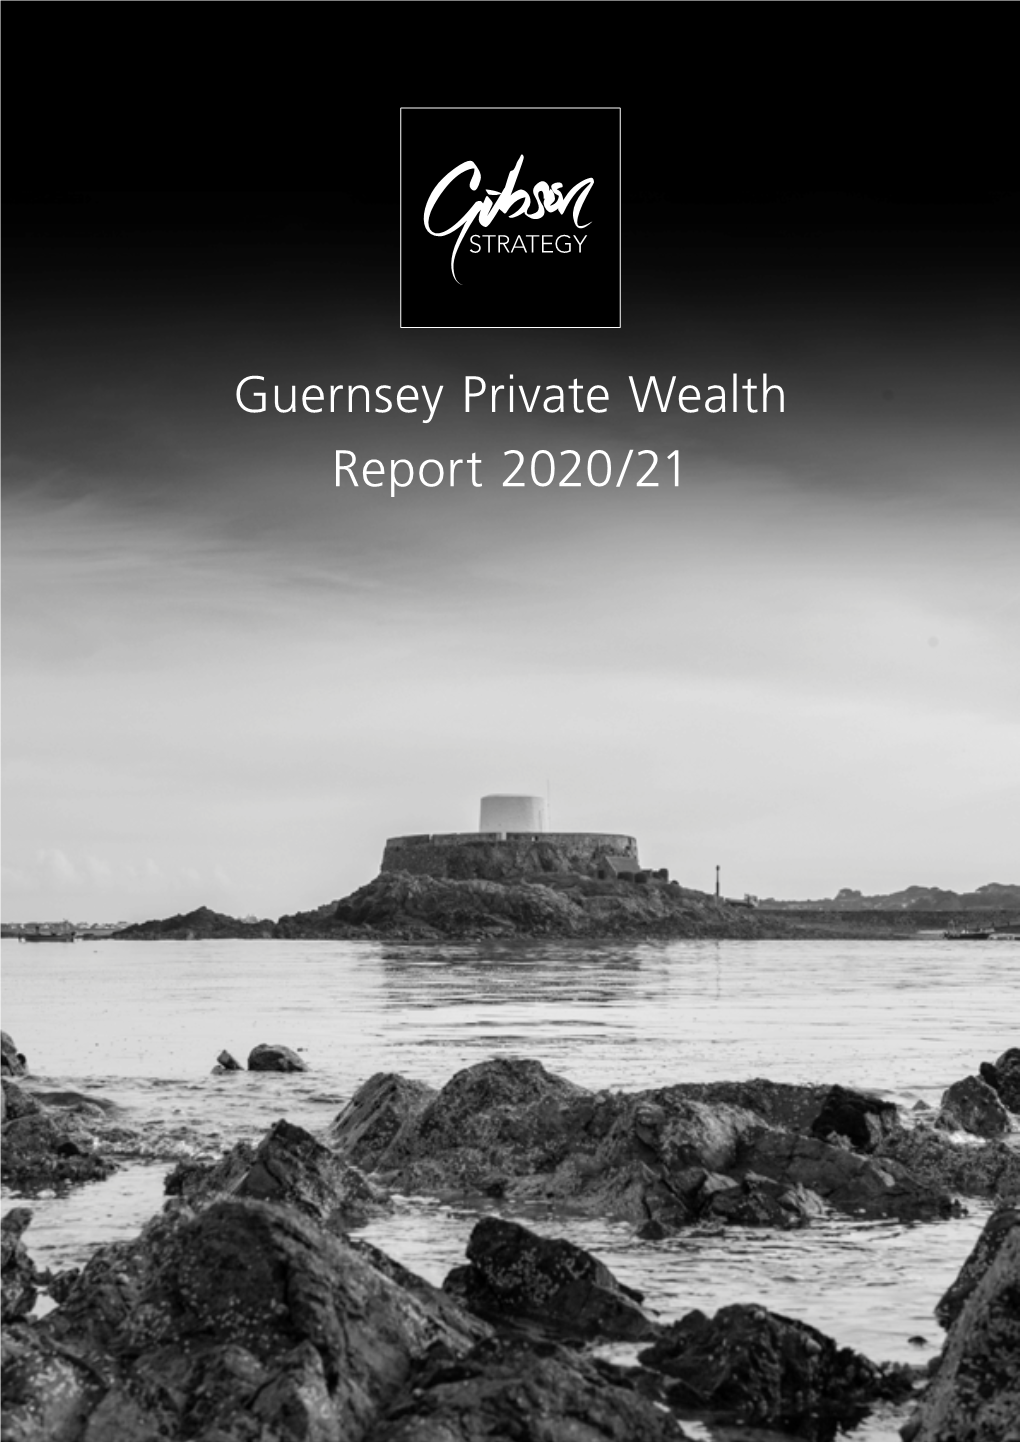 Guernsey Private Wealth Report 2020/21 Contents Foreword Guernsey Private Wealth Report 2020/21